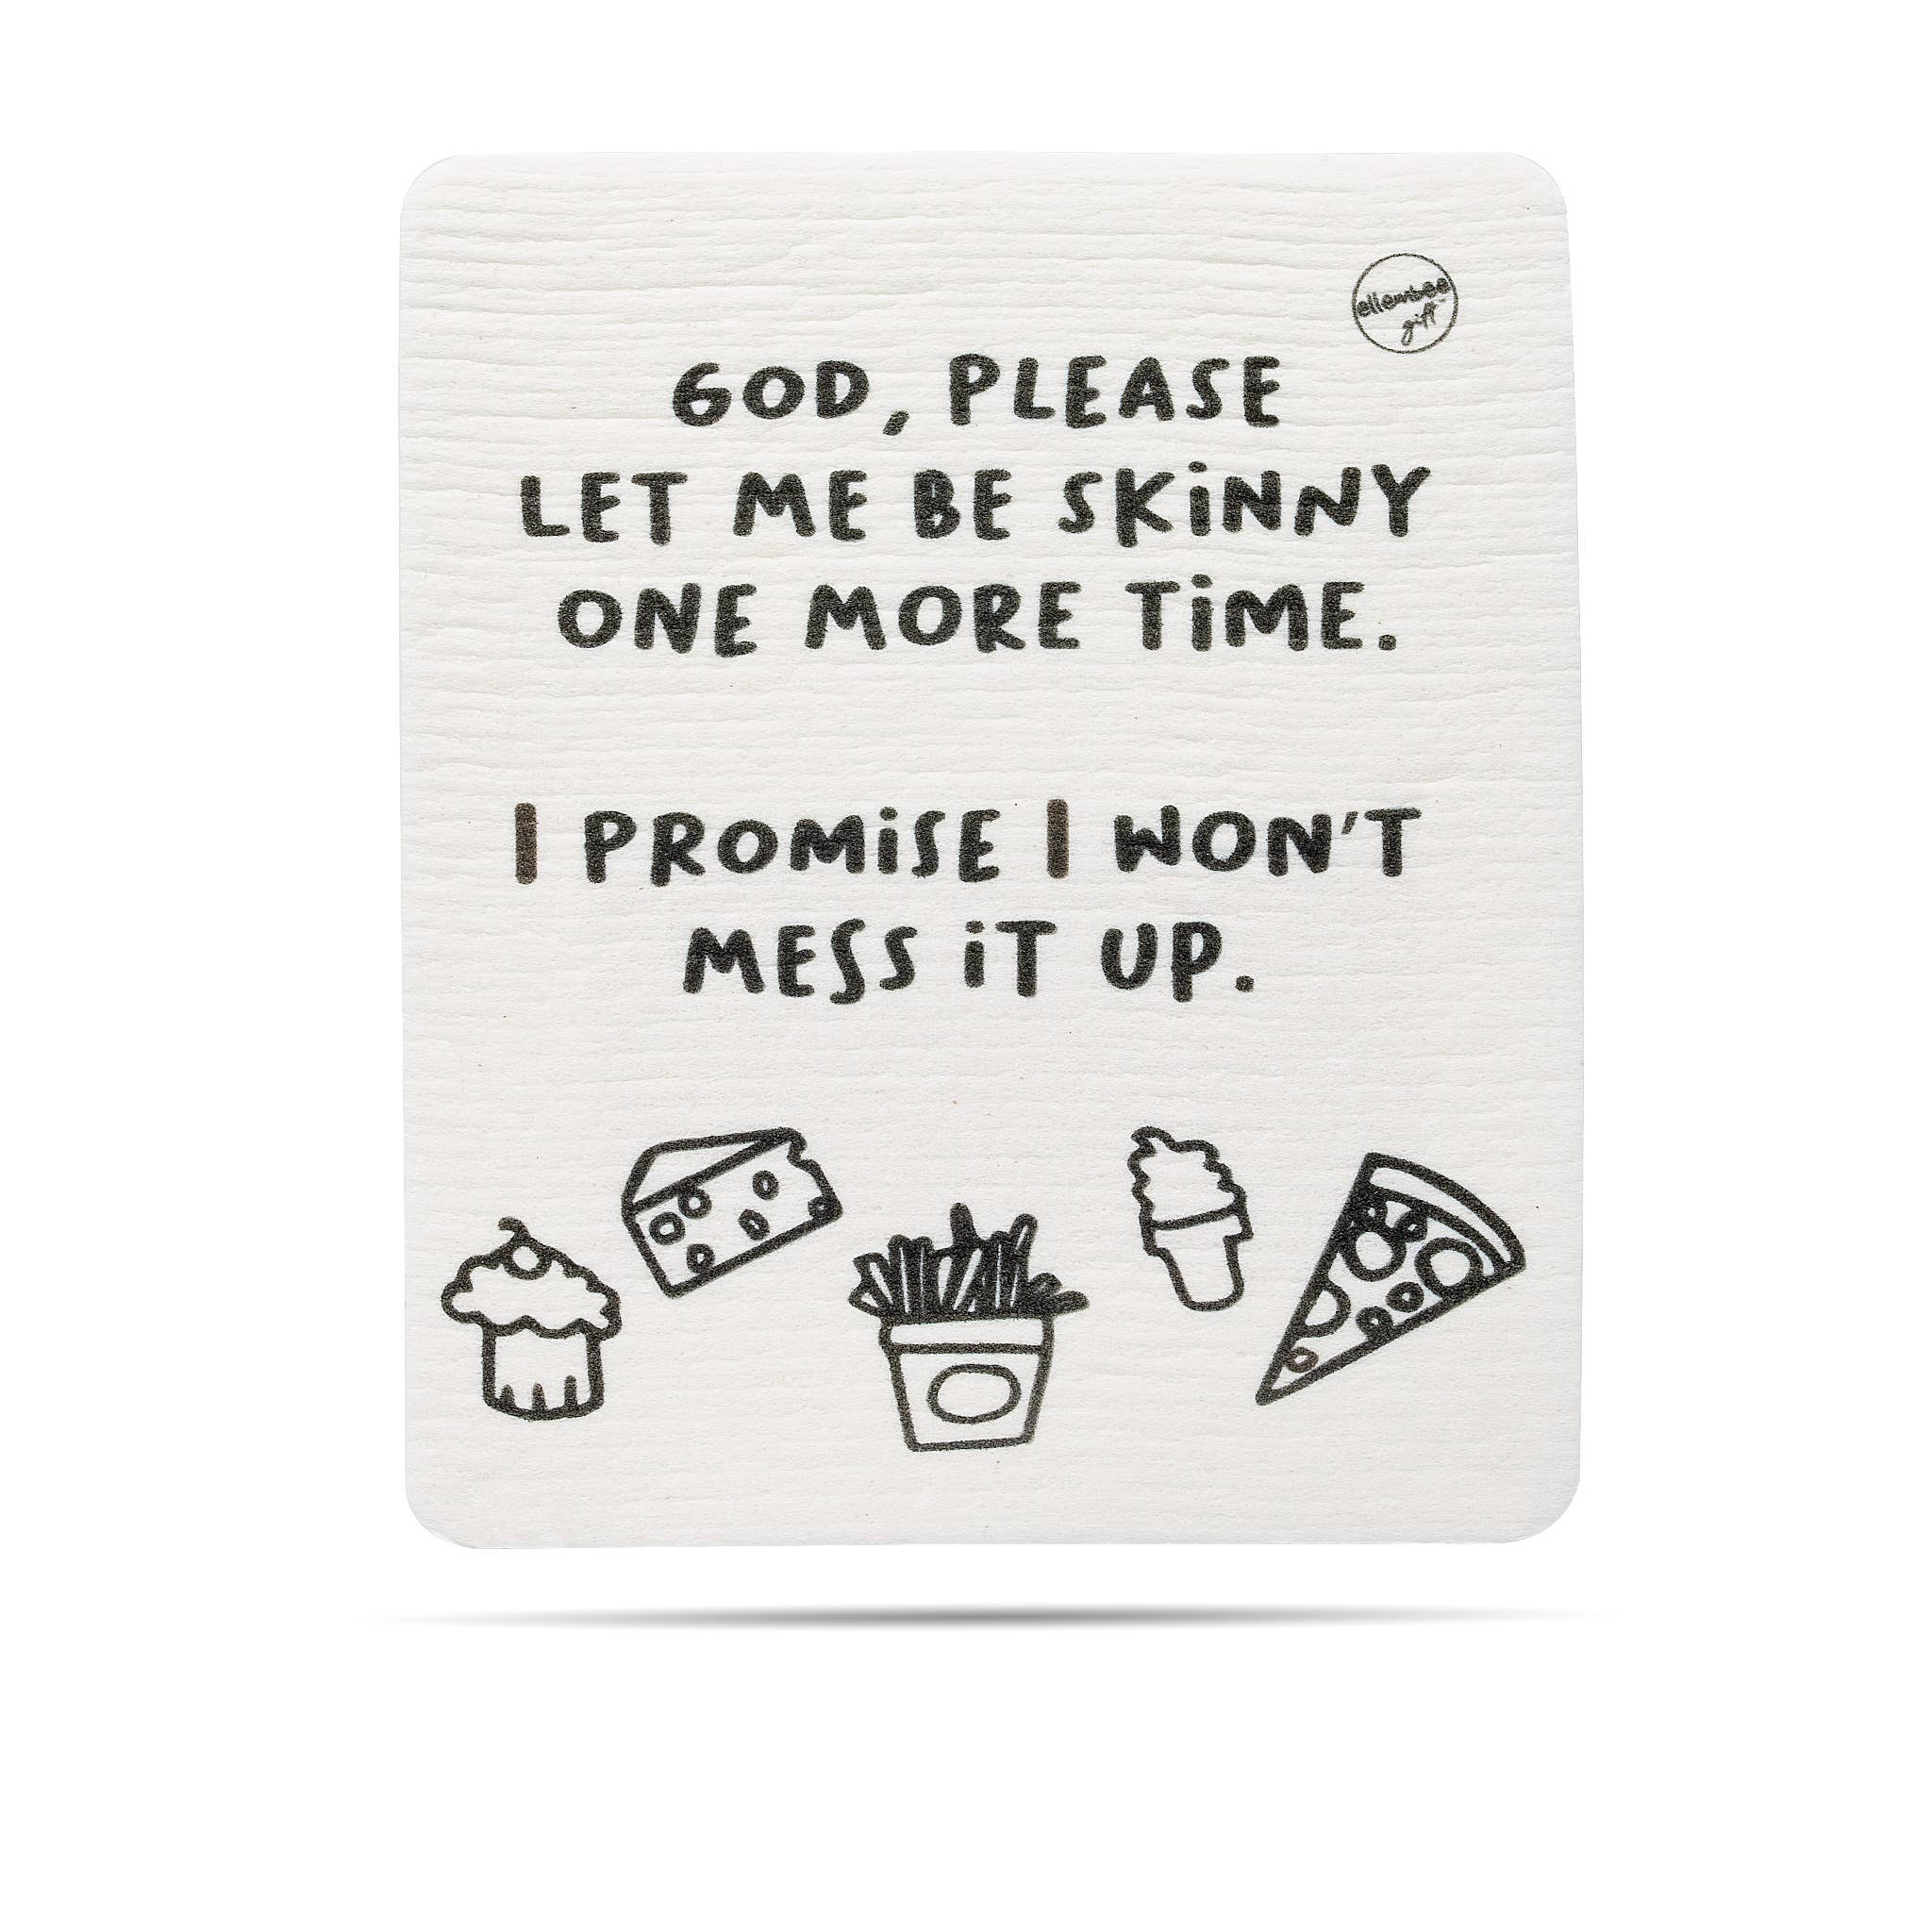 ellembee gift - God please let me be skinny one more time Swedish dishcloths